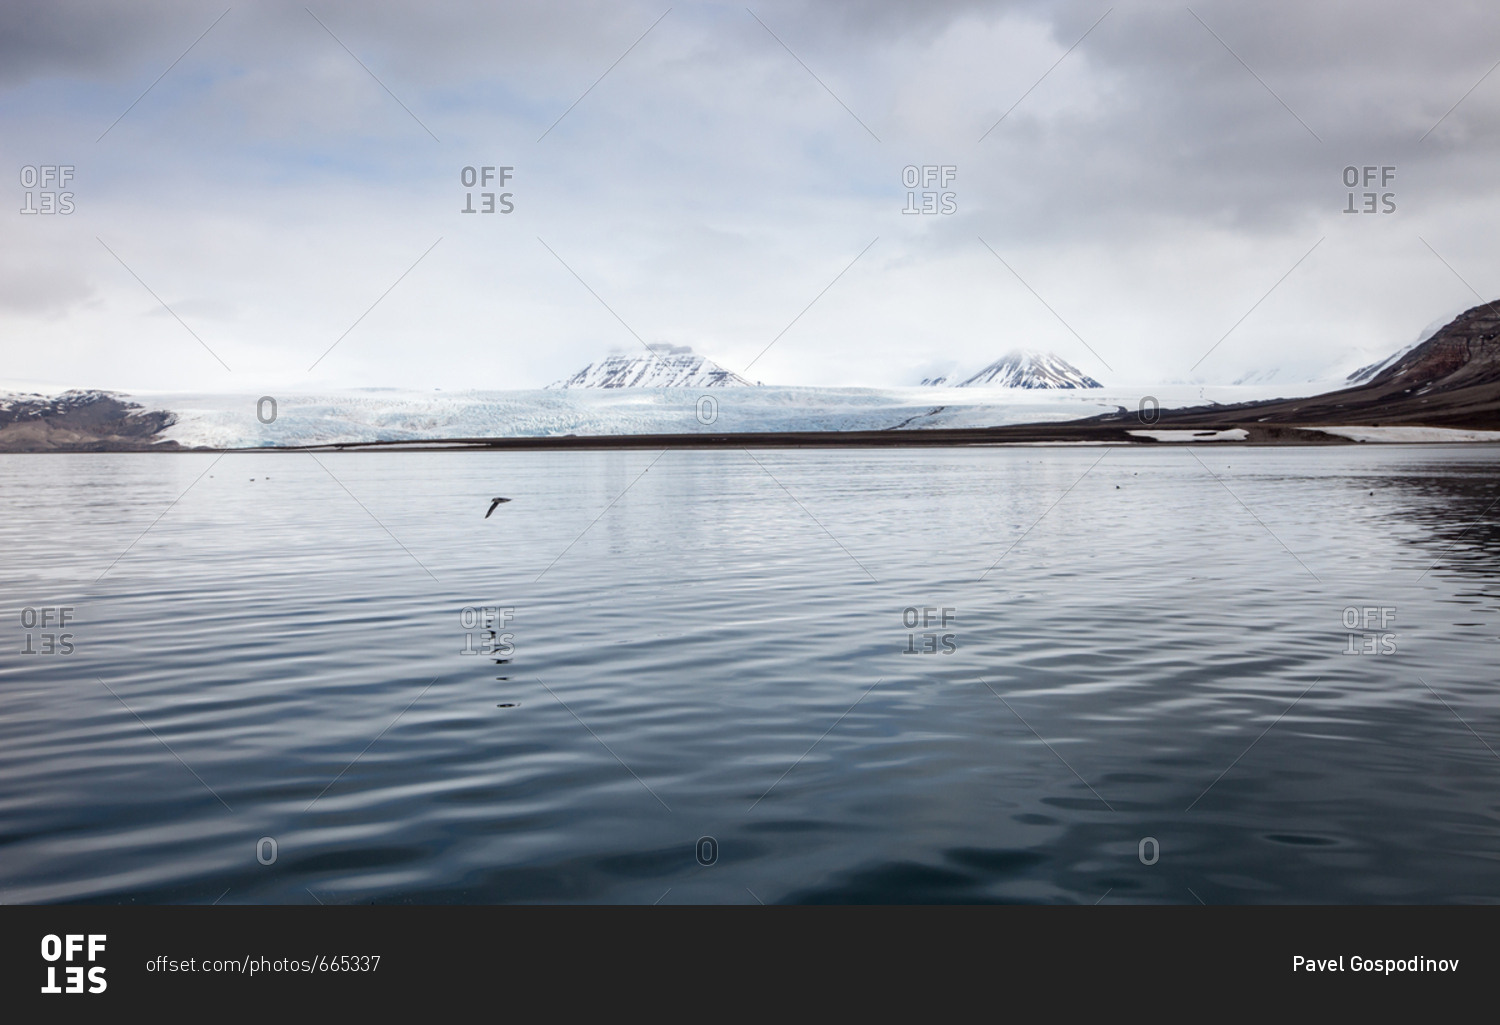 Solitary bird flying over calm sea in the Svalbard Archipelago